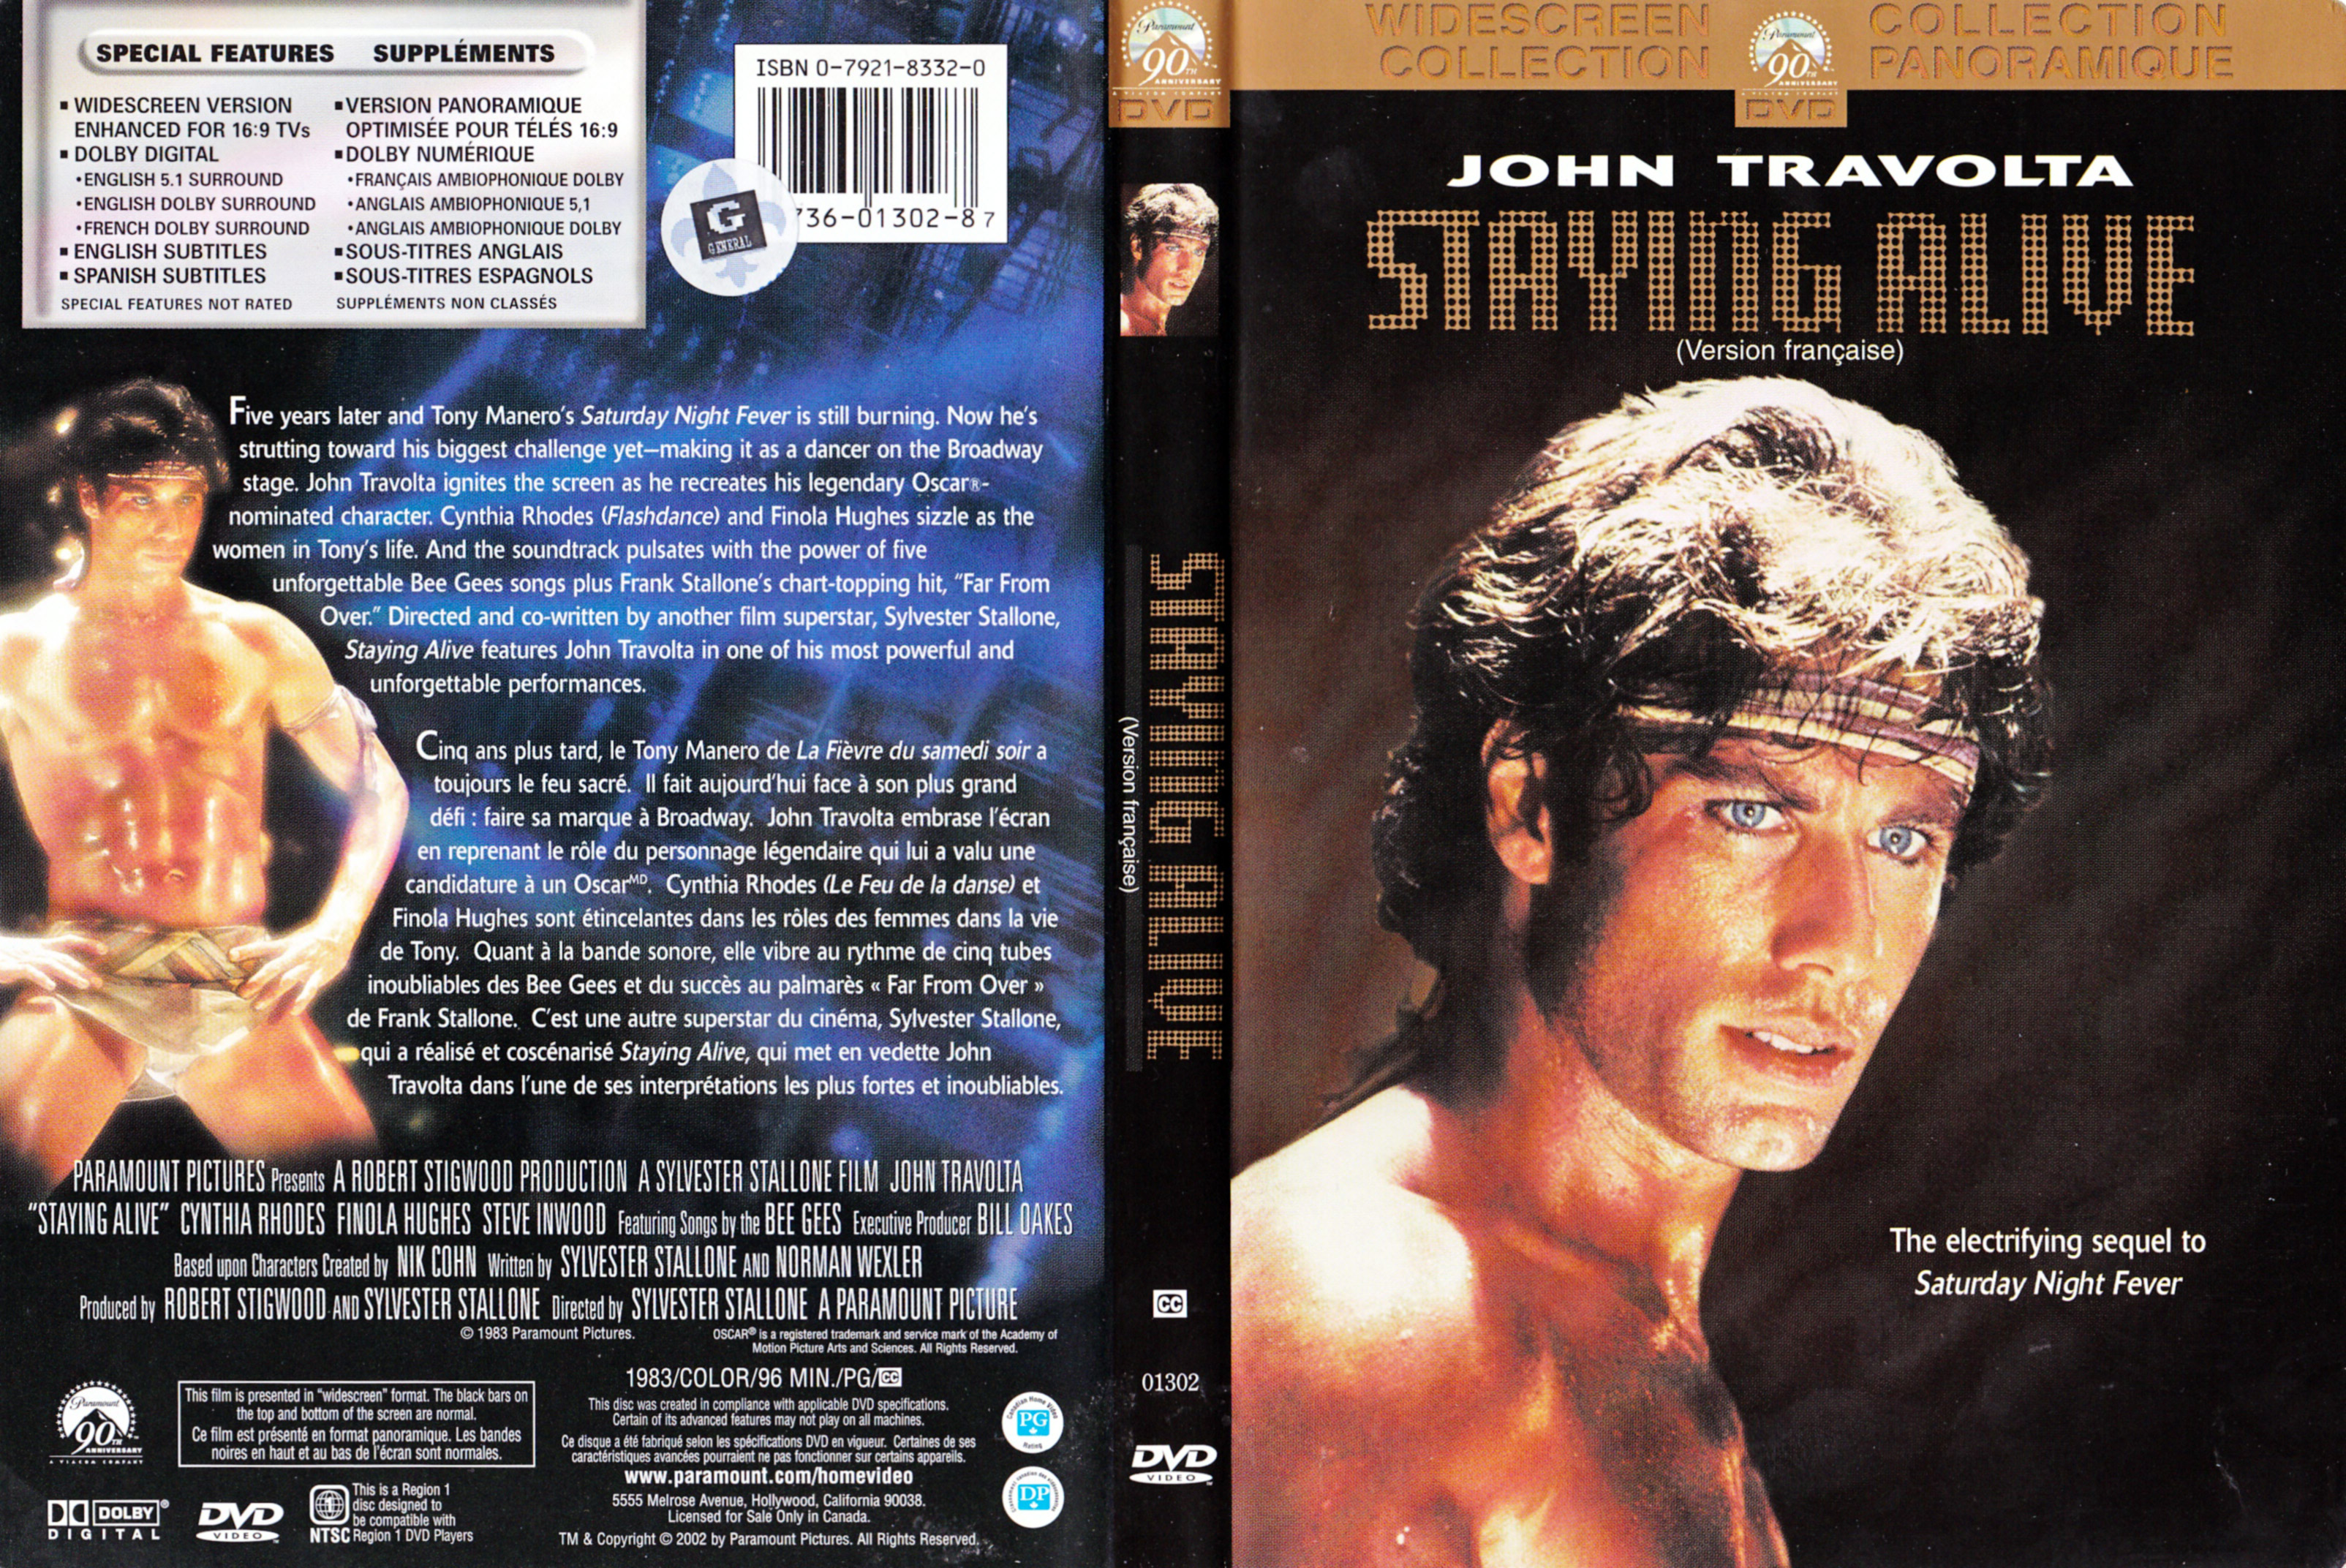 Jaquette DVD Staying alive (Canadienne)